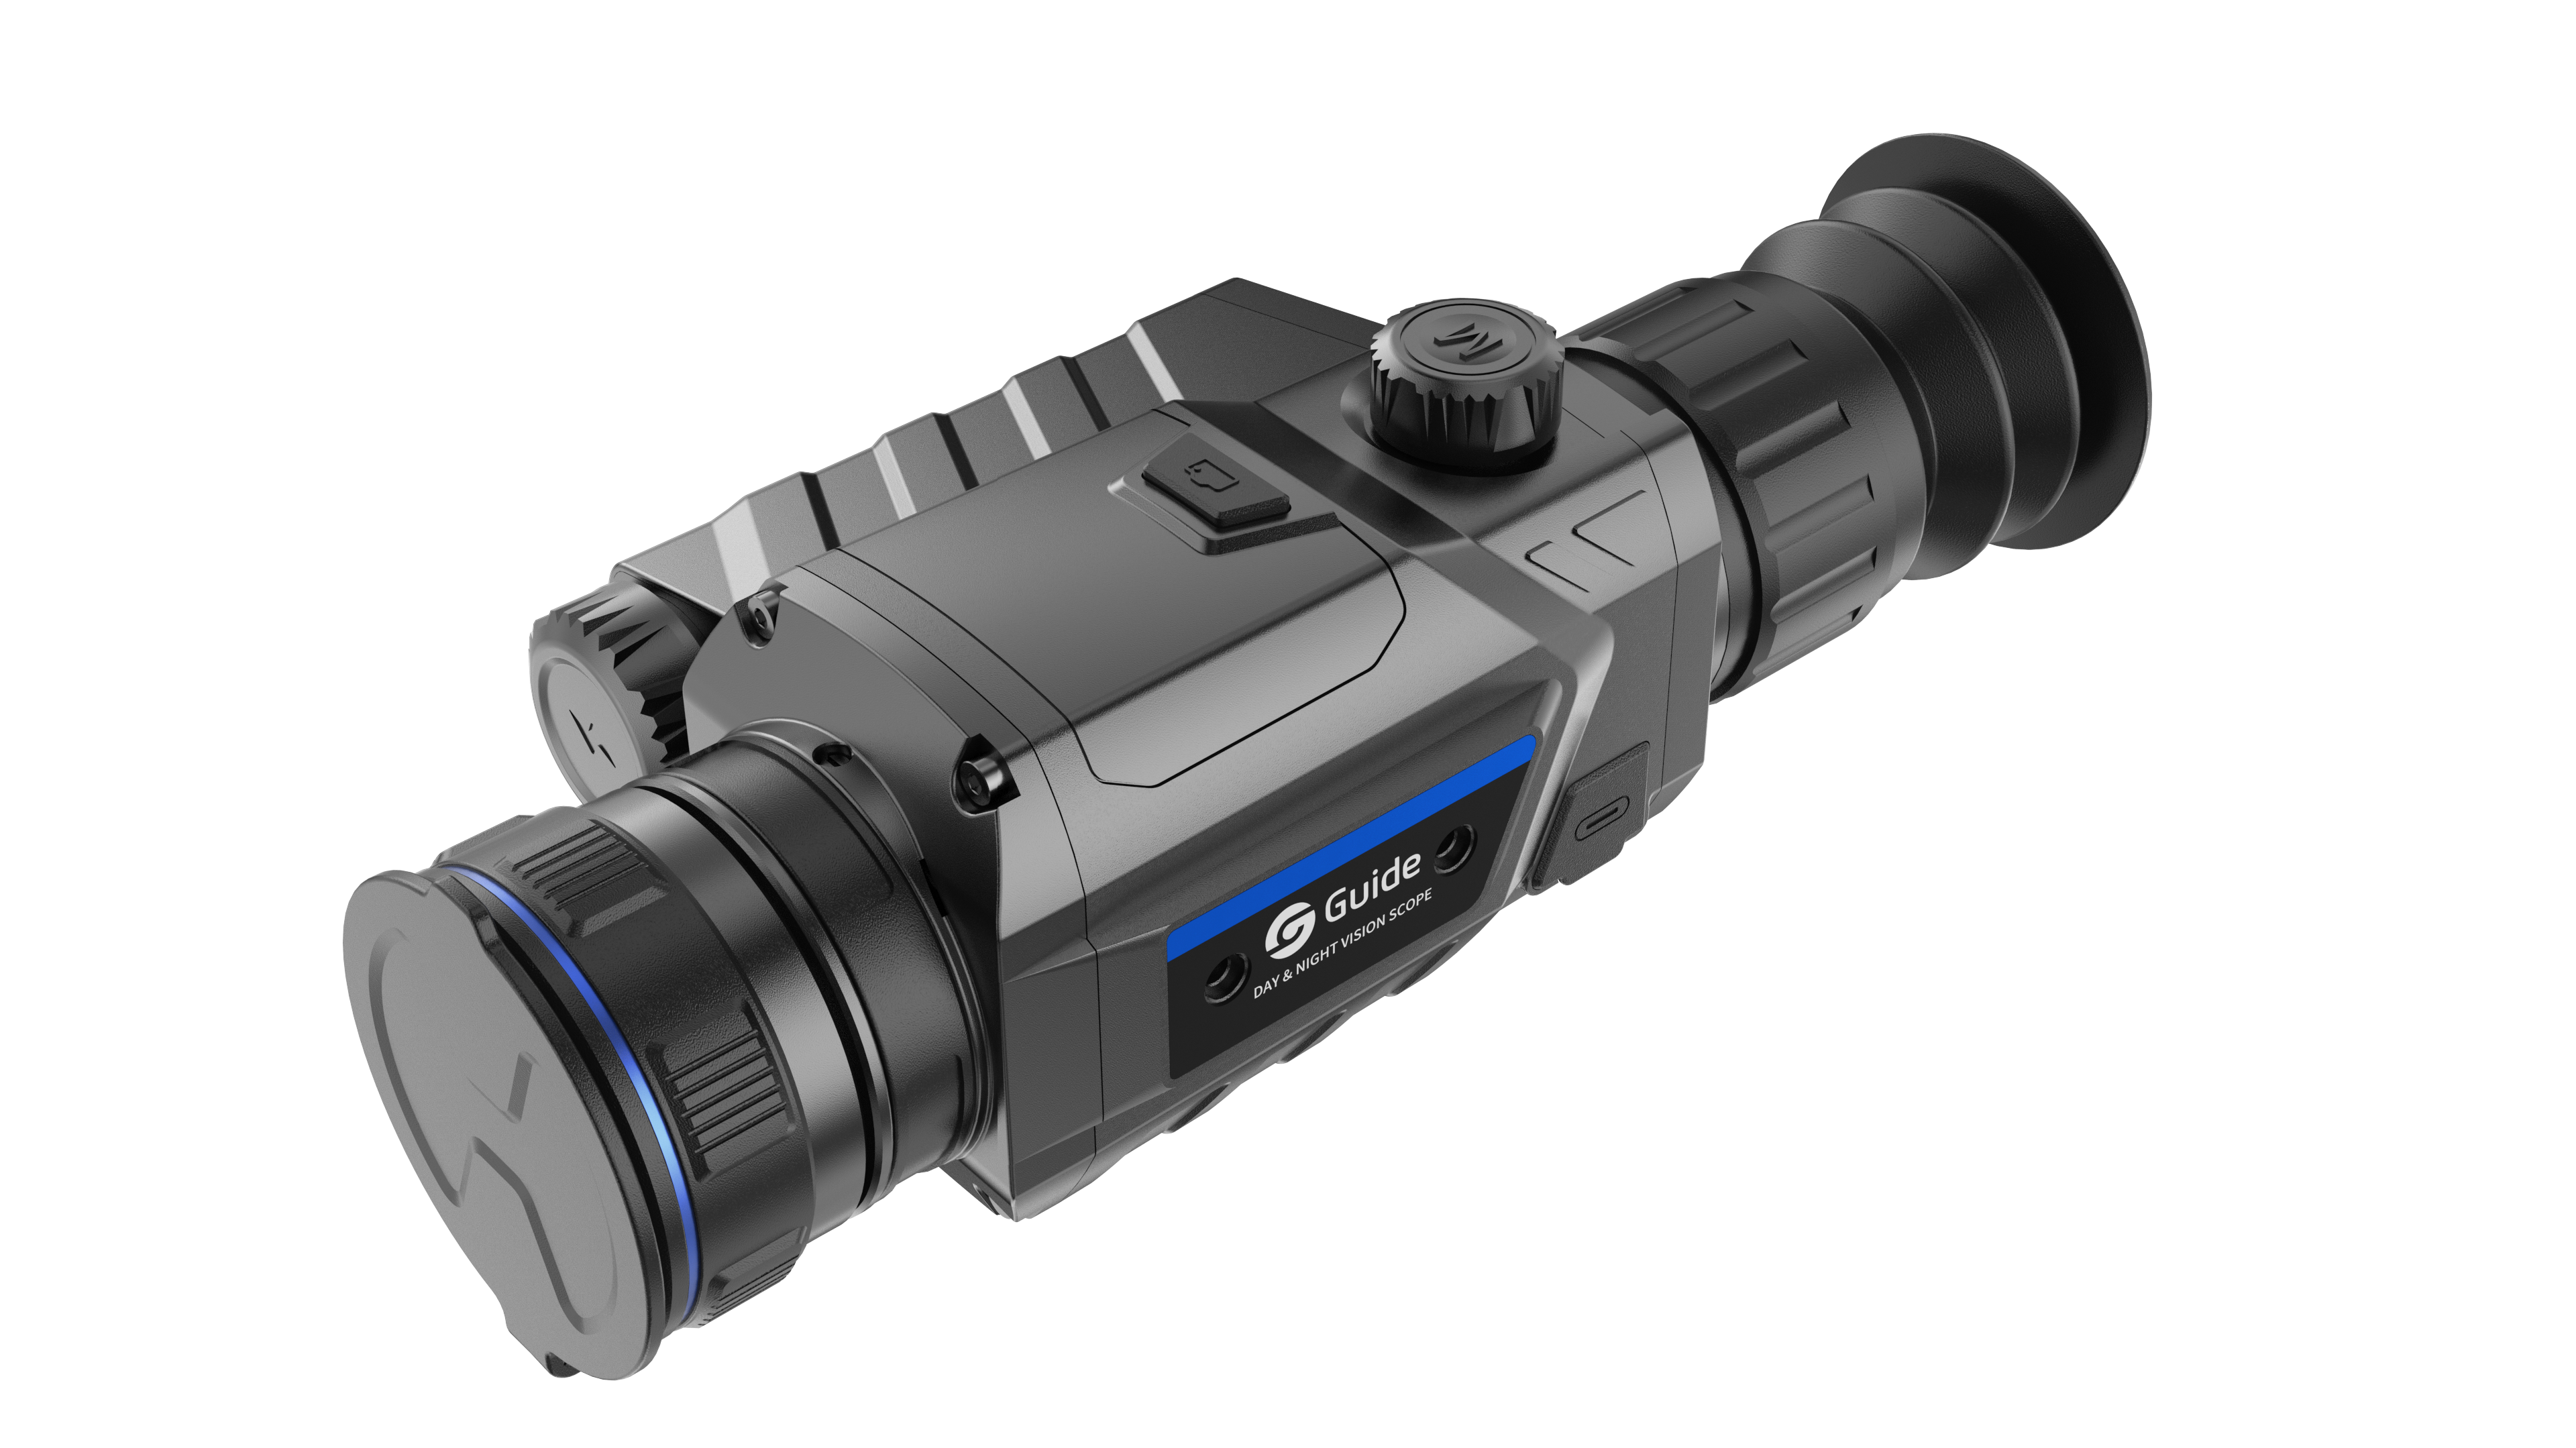 GUIDE Digital Day & Night Vision Scope DR30